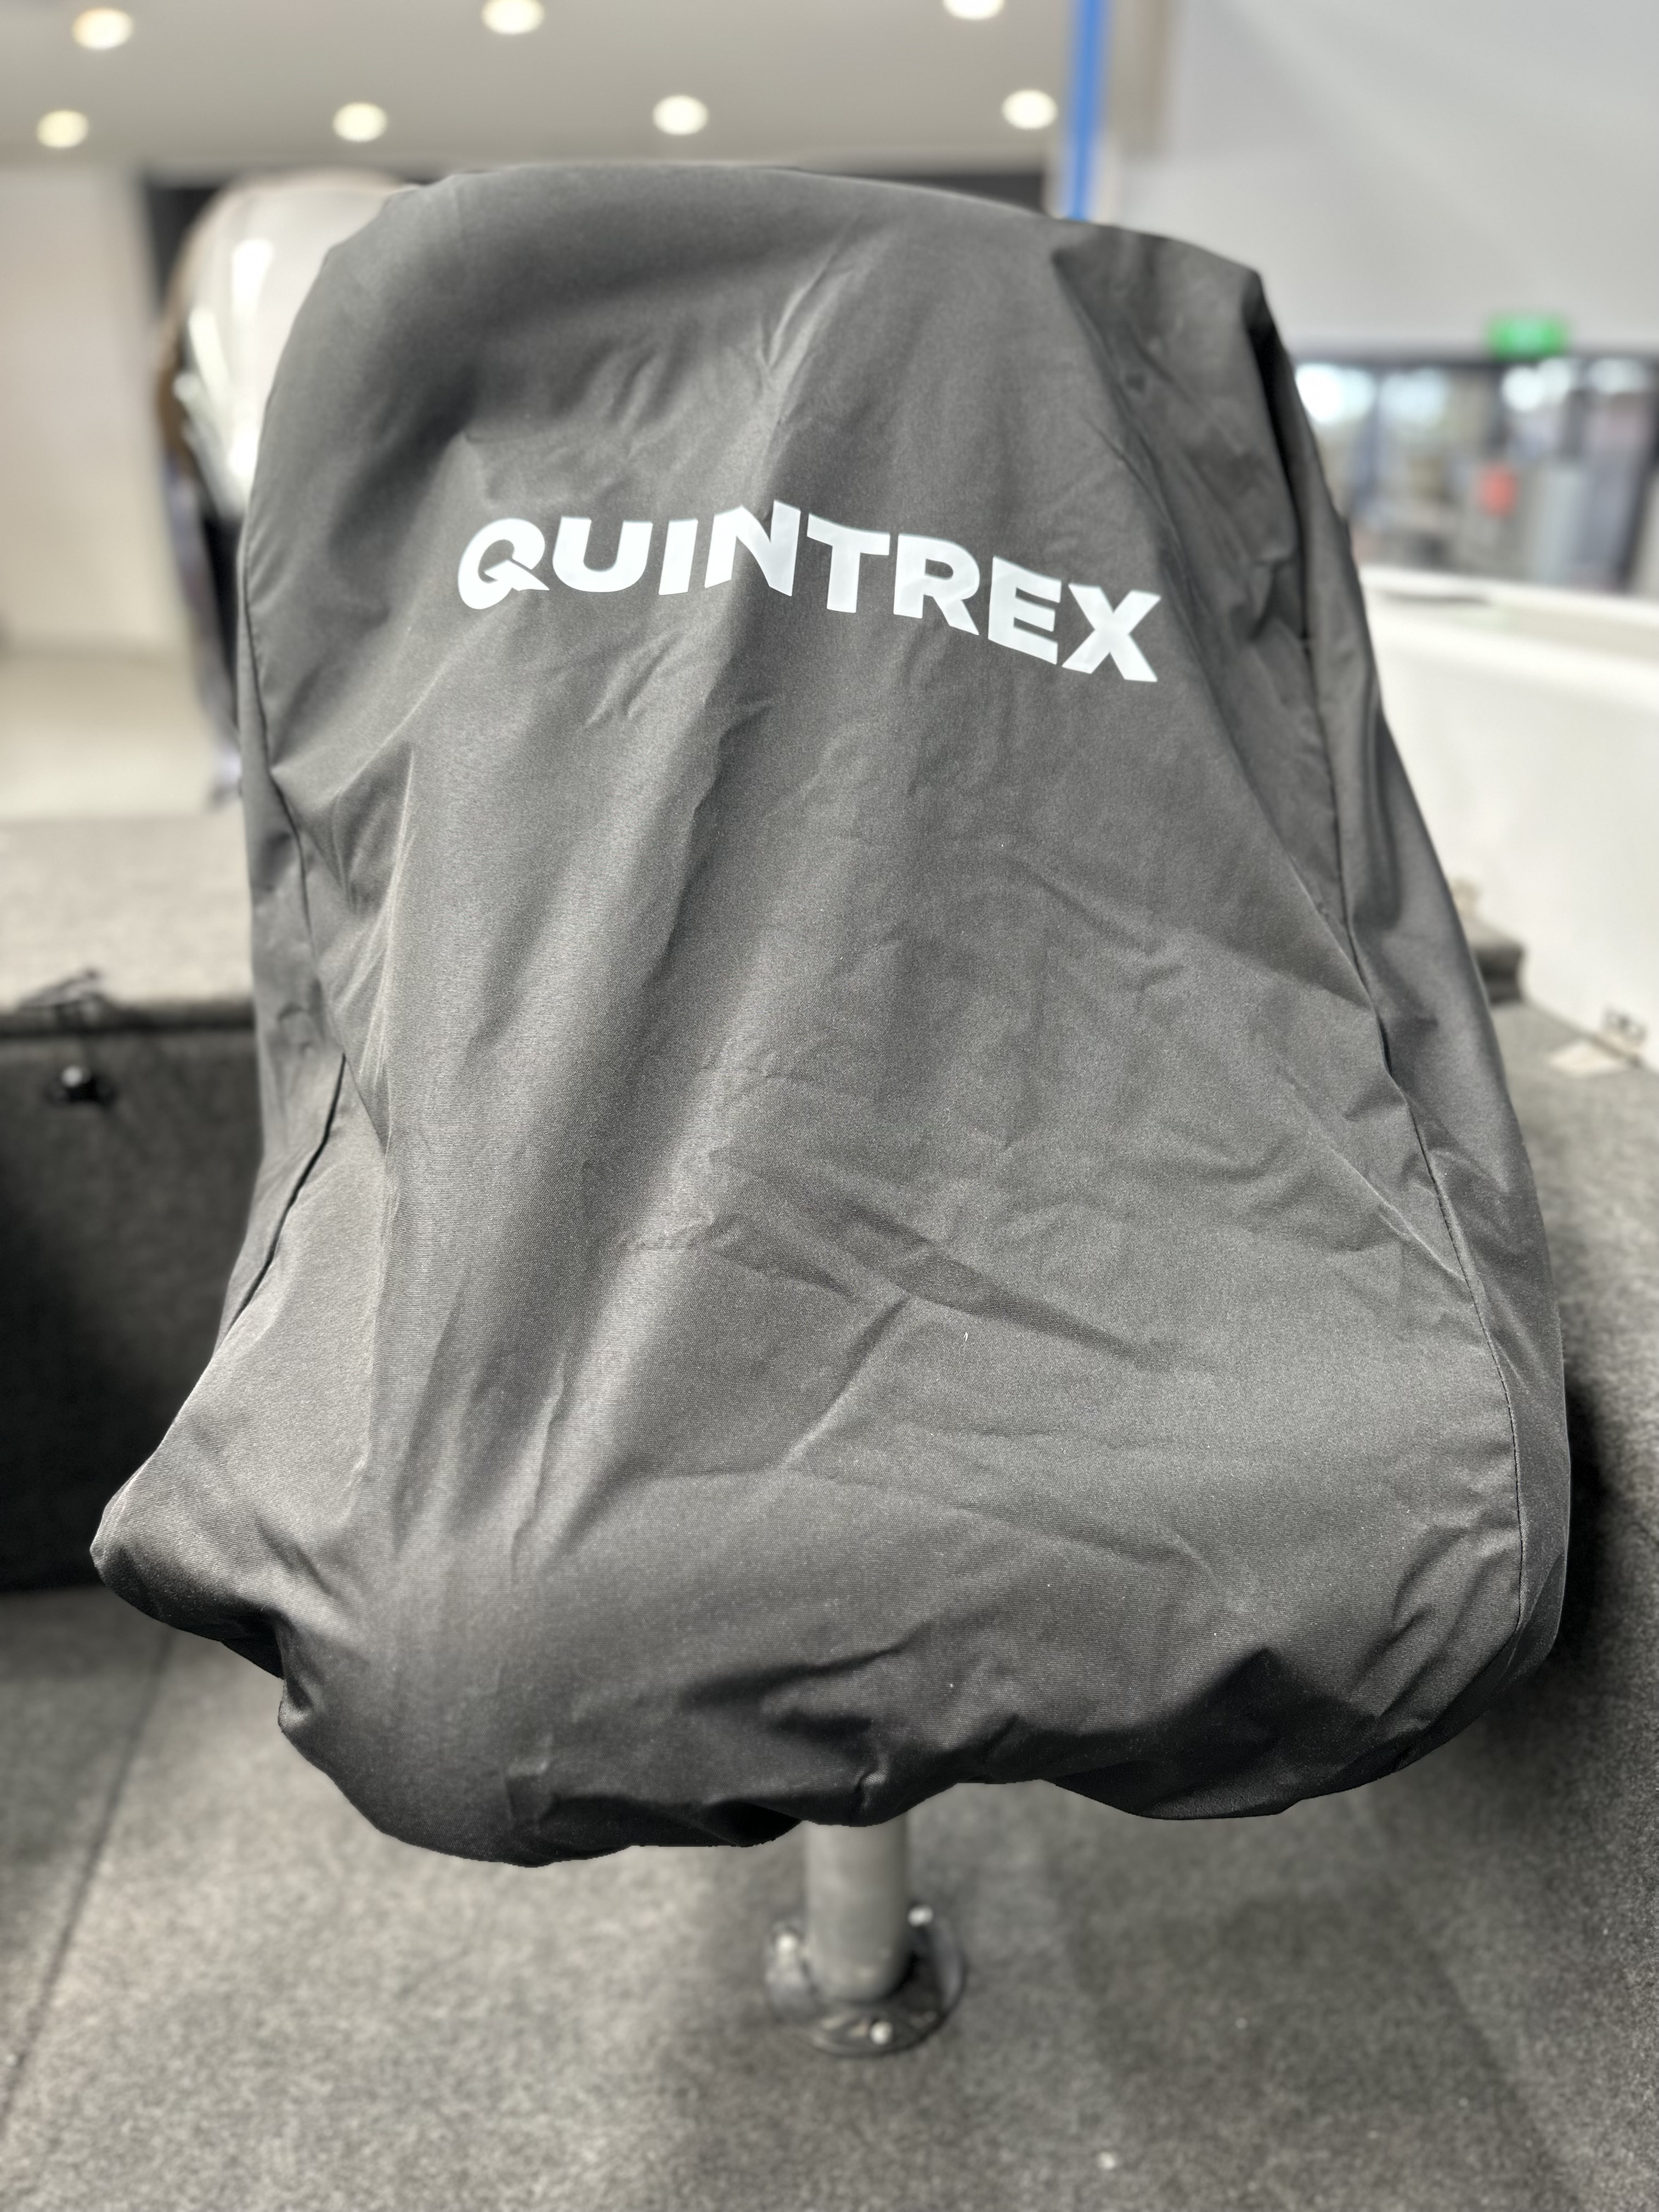 Quintrex Seat Covers LARGE SEAT COVER